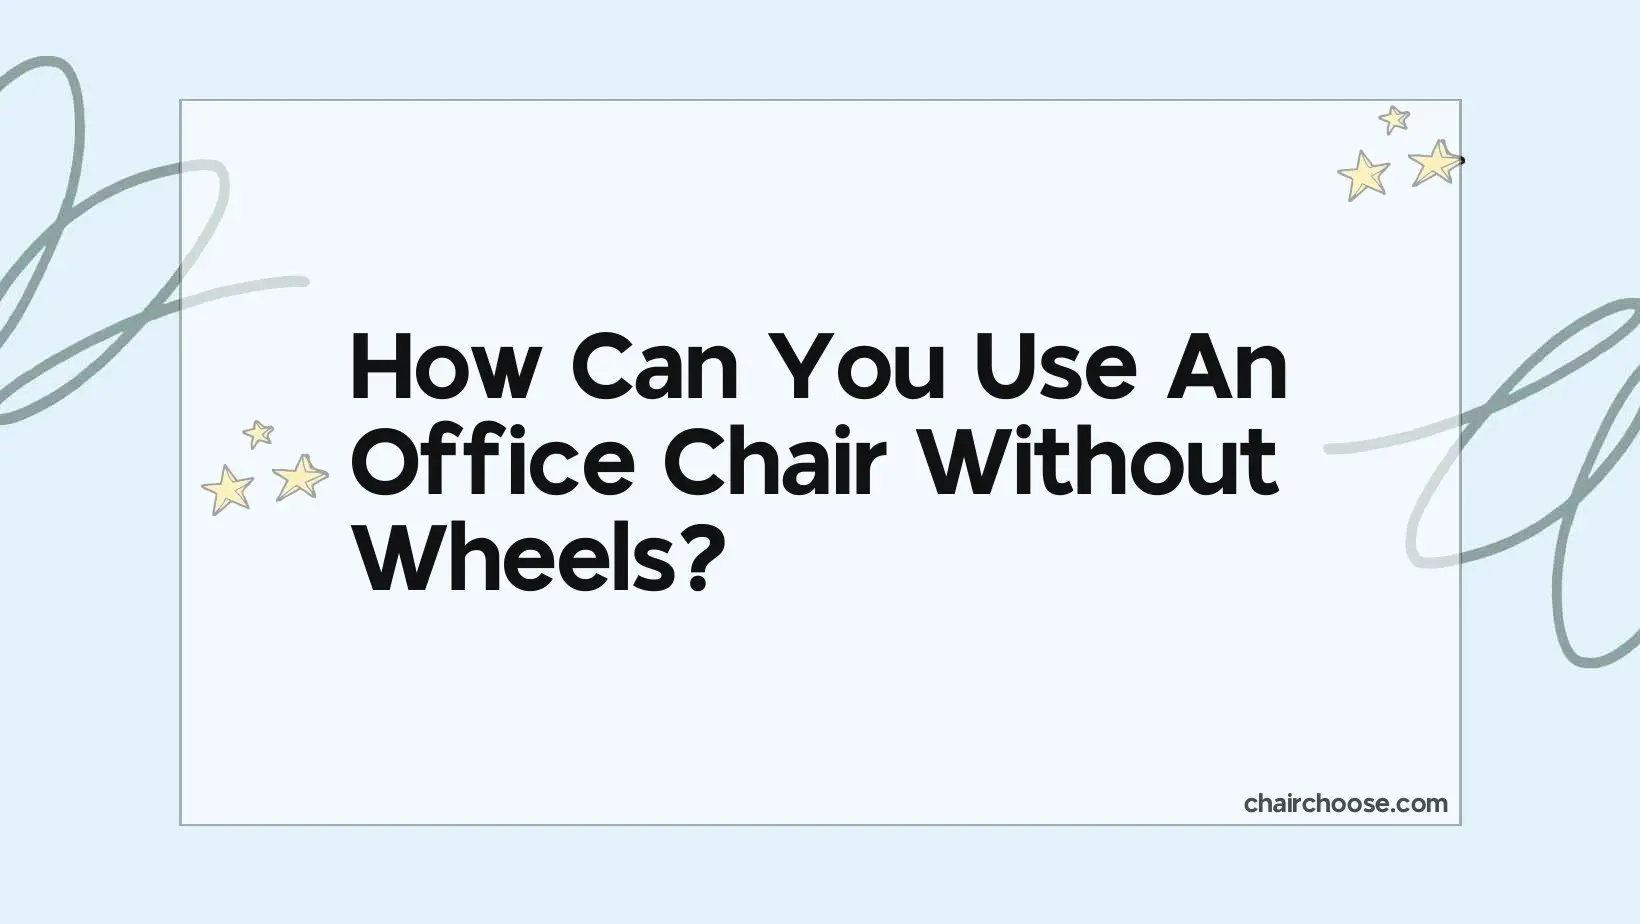 How Can You Use An Office Chair Without Wheels?